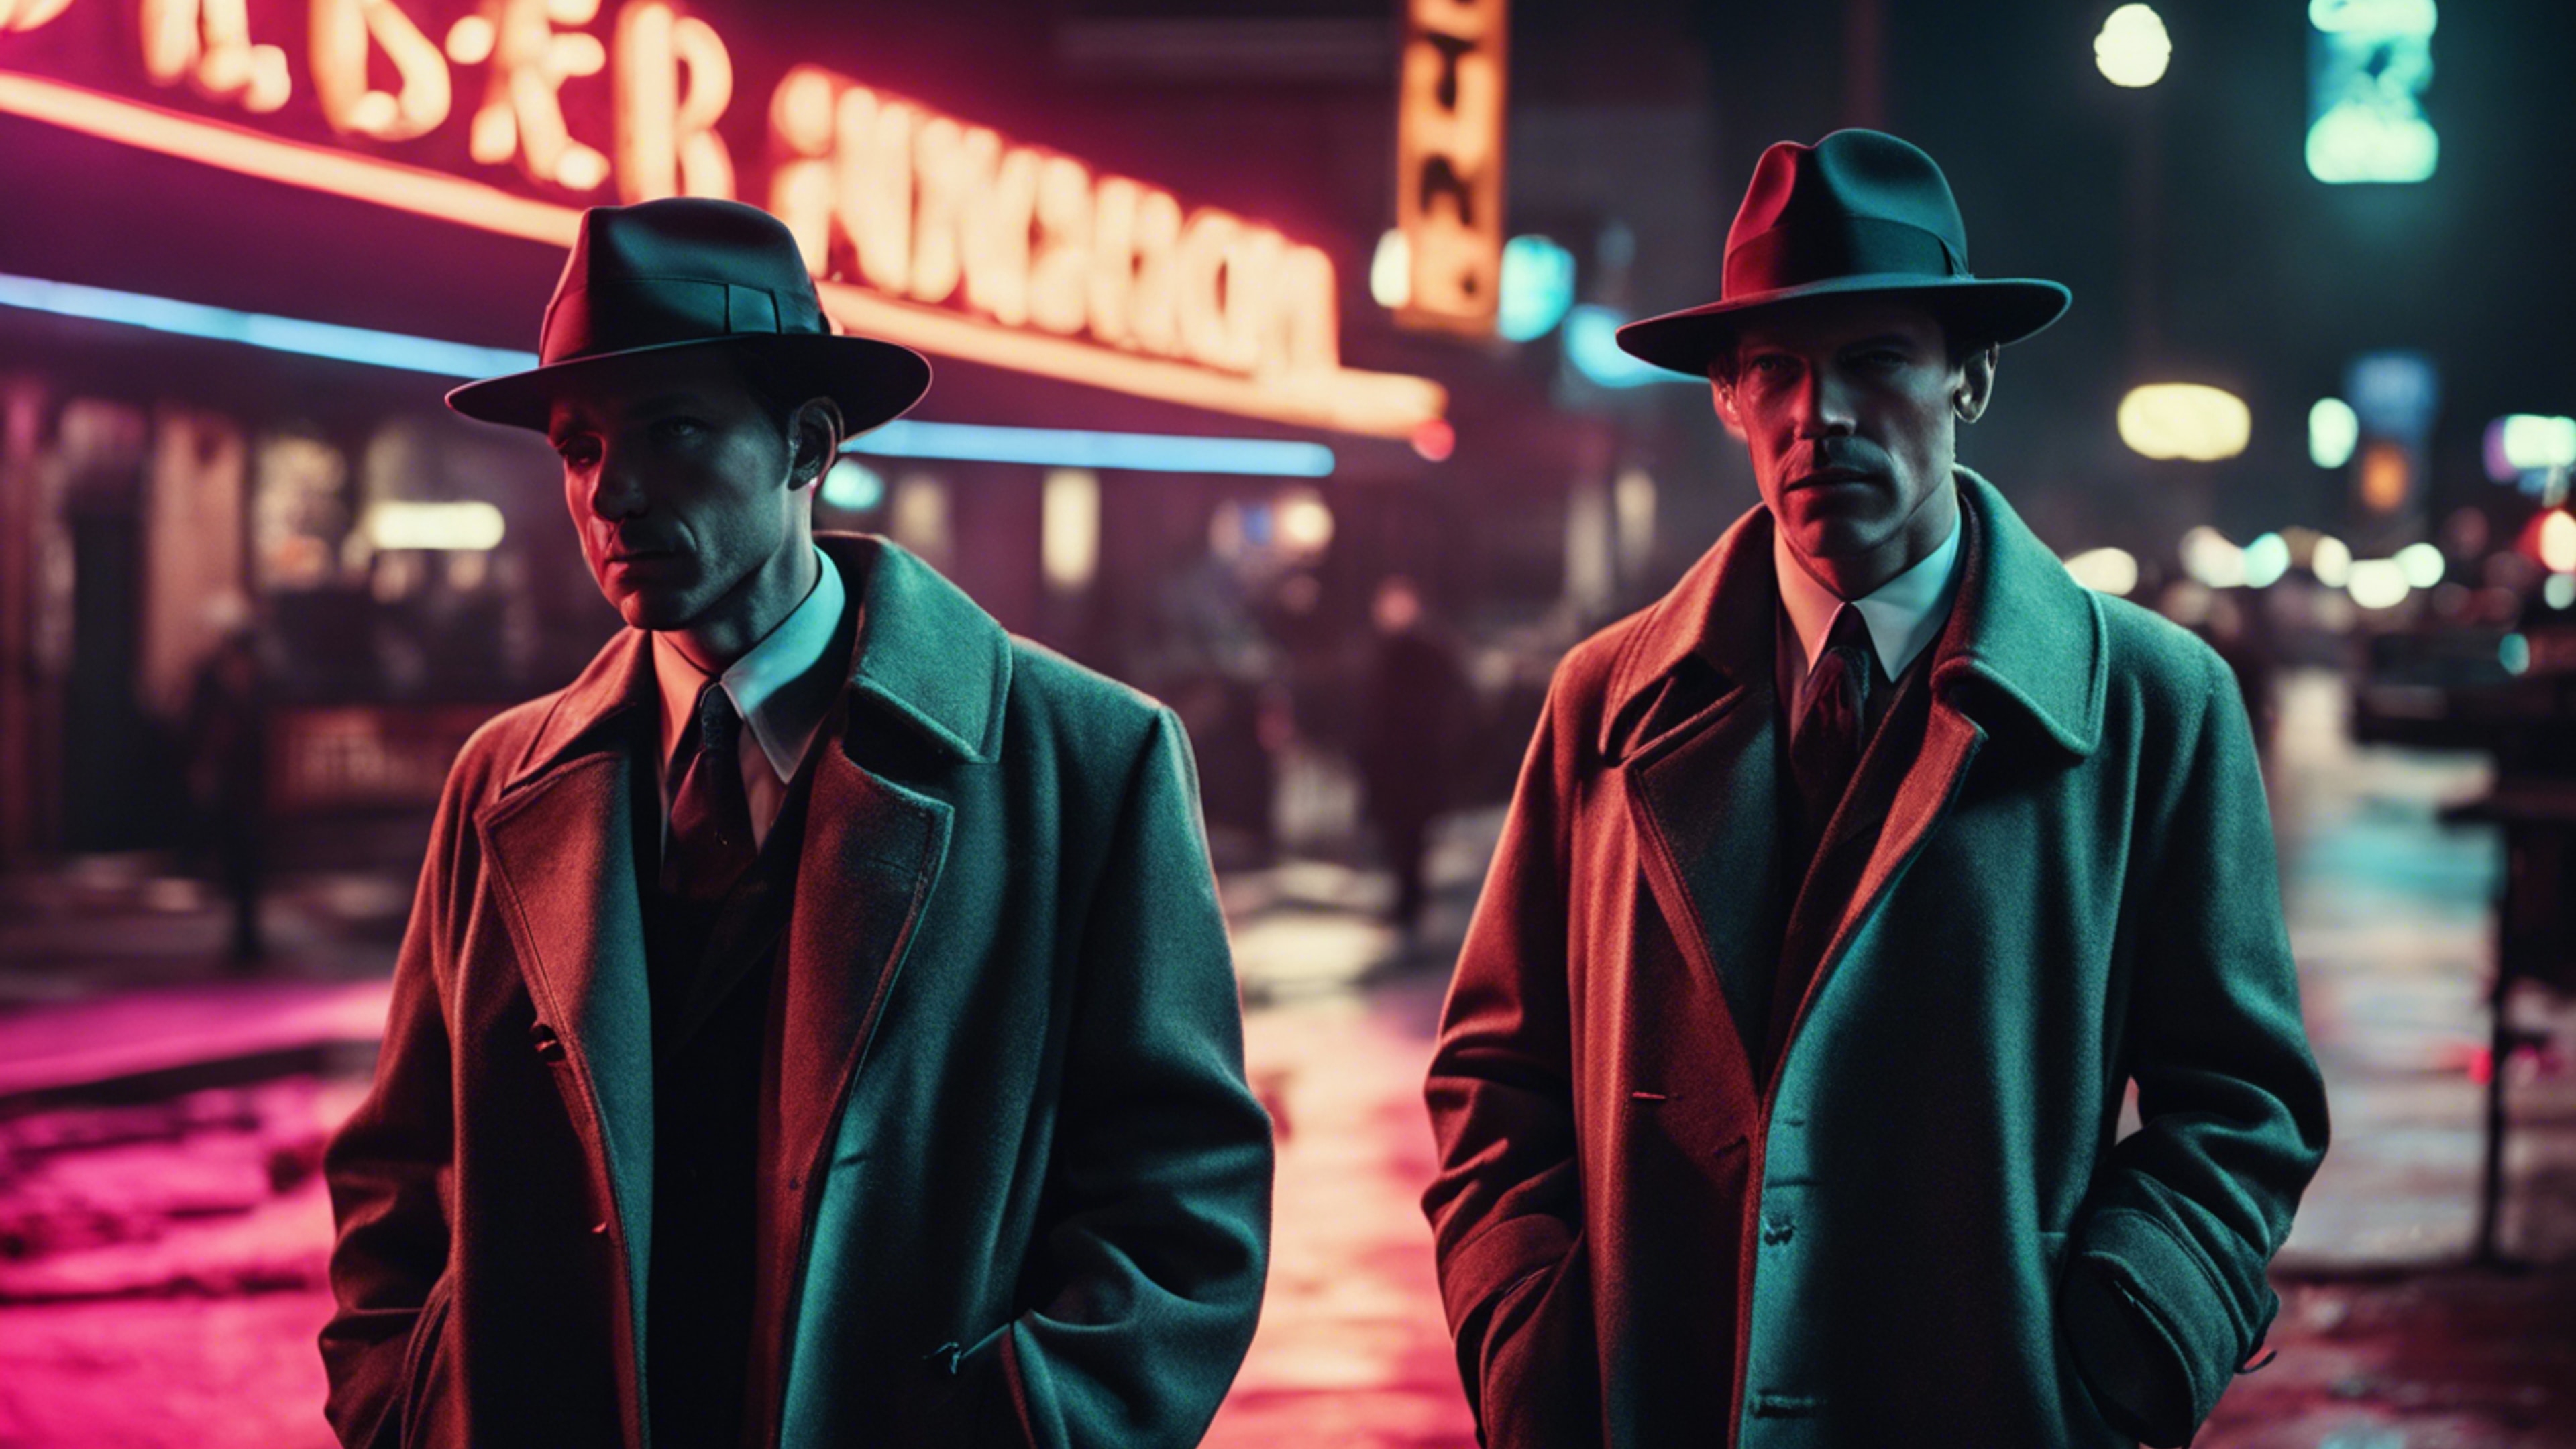 An old-timey noir detective scene, complete with fedoras and trench coats, but with a cool, modern neon black aesthetic.壁紙[1130d0c9b589467184c0]